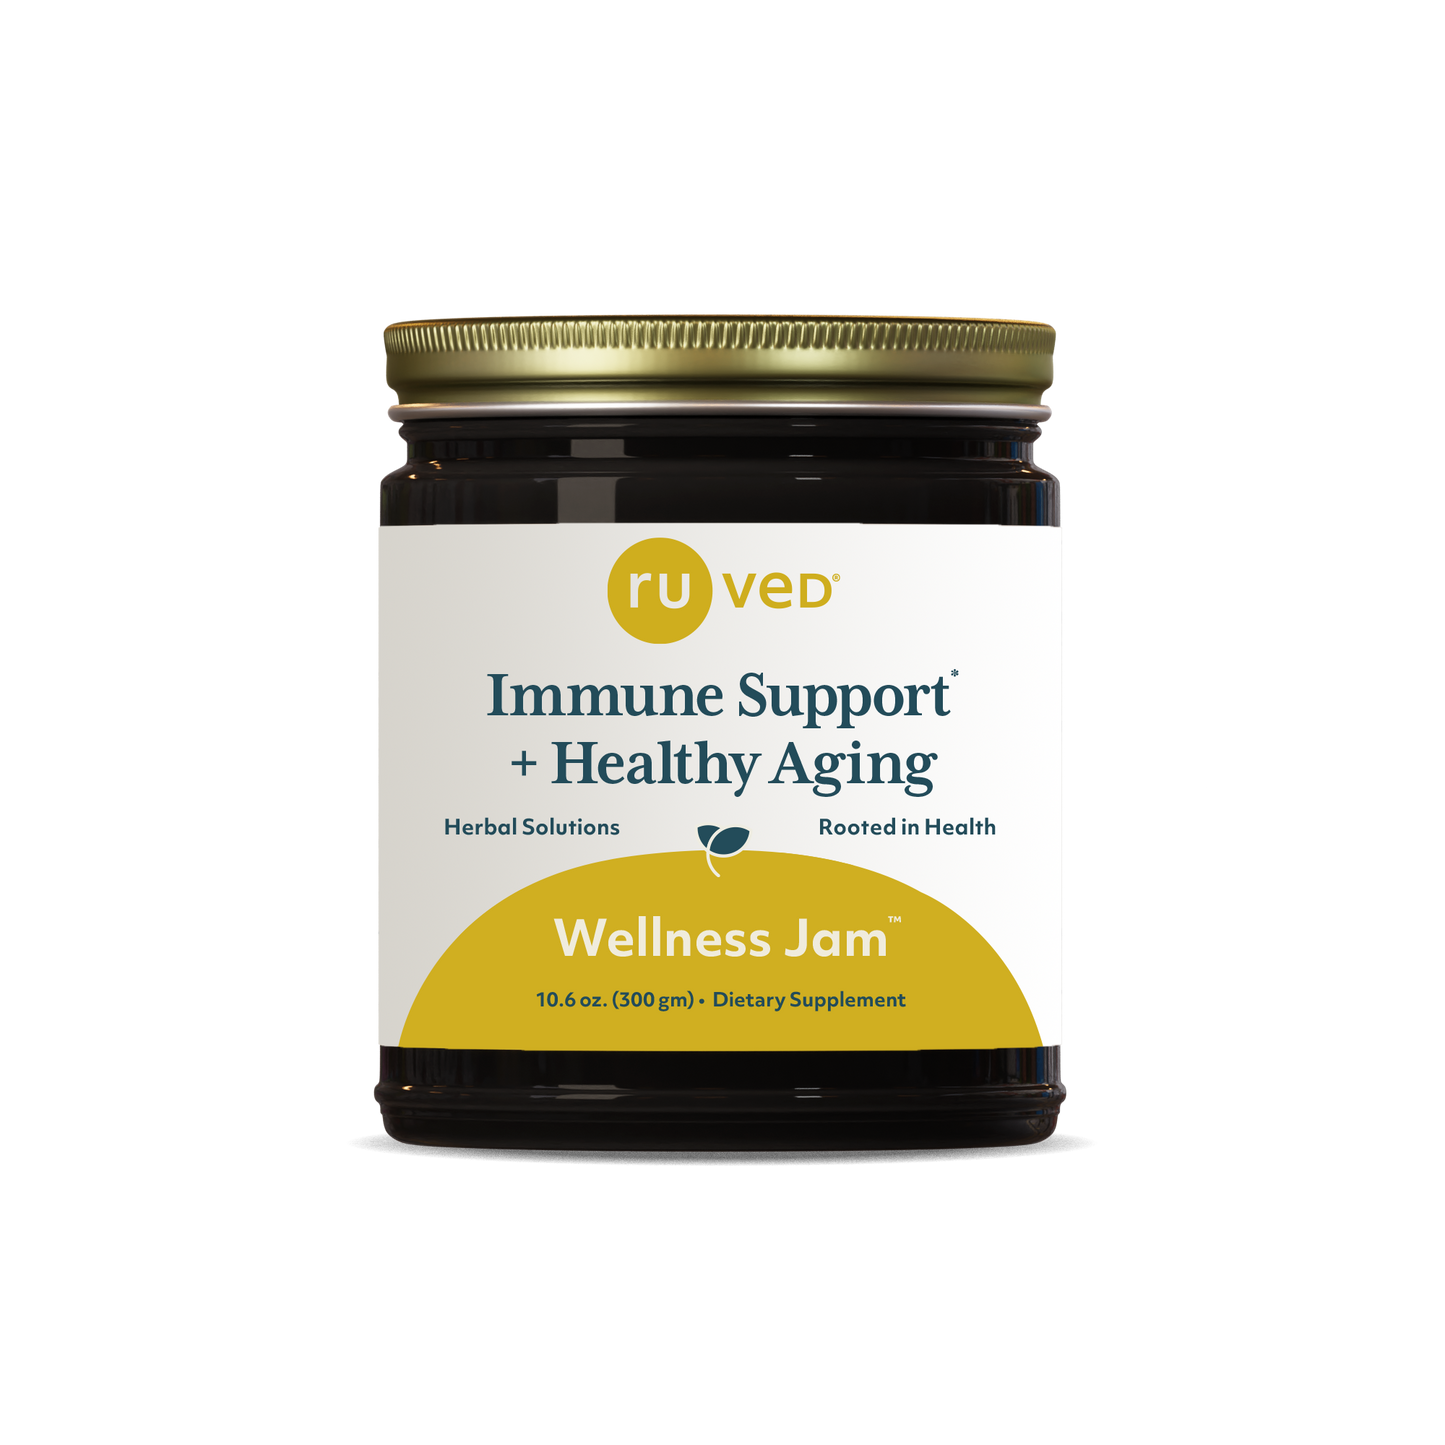 wellness jam Antioxidant Packed Jam for All Day Nourishment, Tasty Support for Whole Body Health by ruved herbal supplements and ayush herbs 